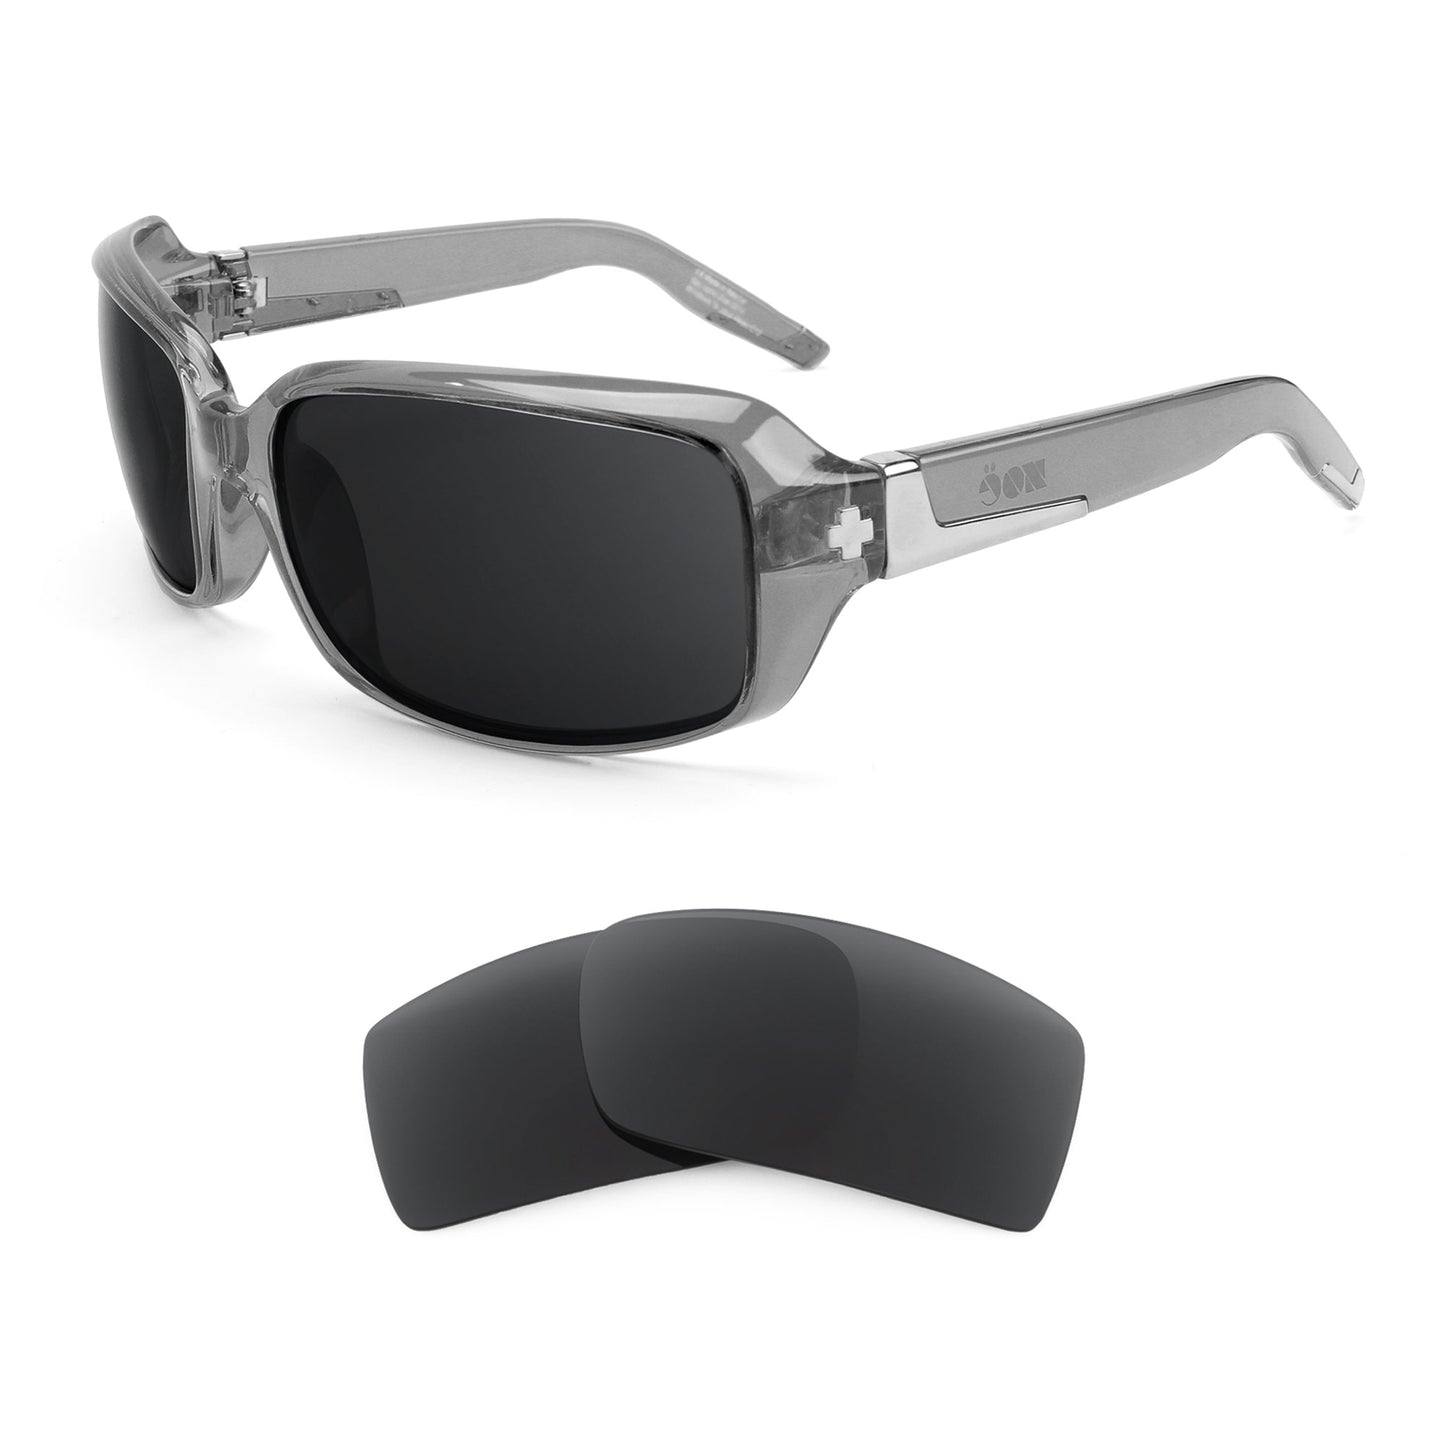 Spy Optic Zoe sunglasses with replacement lenses